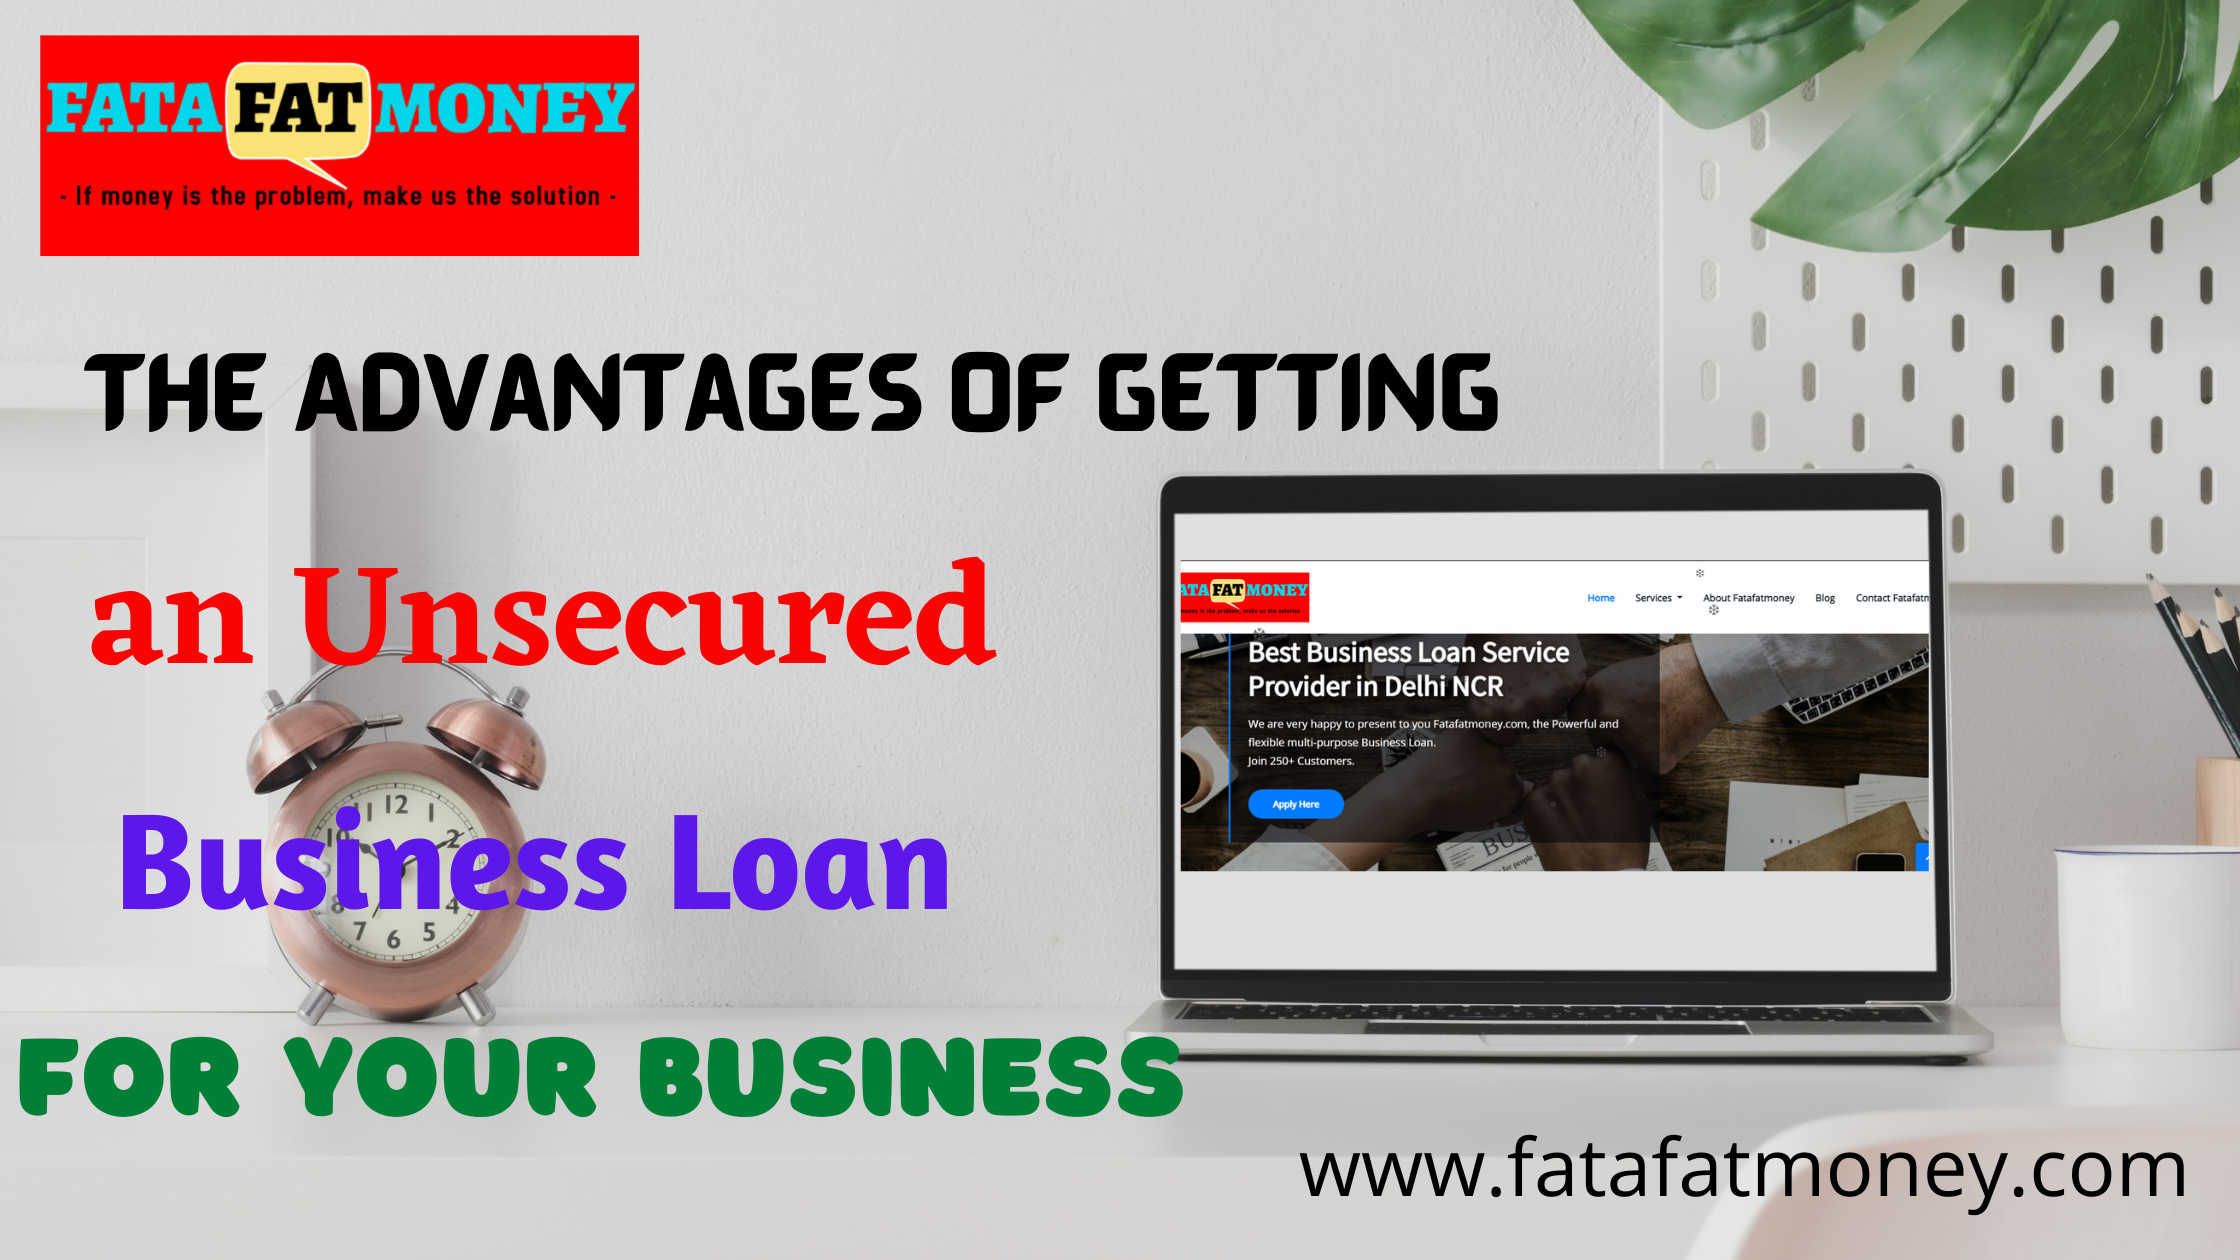 The Advantages of Getting an Unsecured Business Loan for Your Business blog featured image